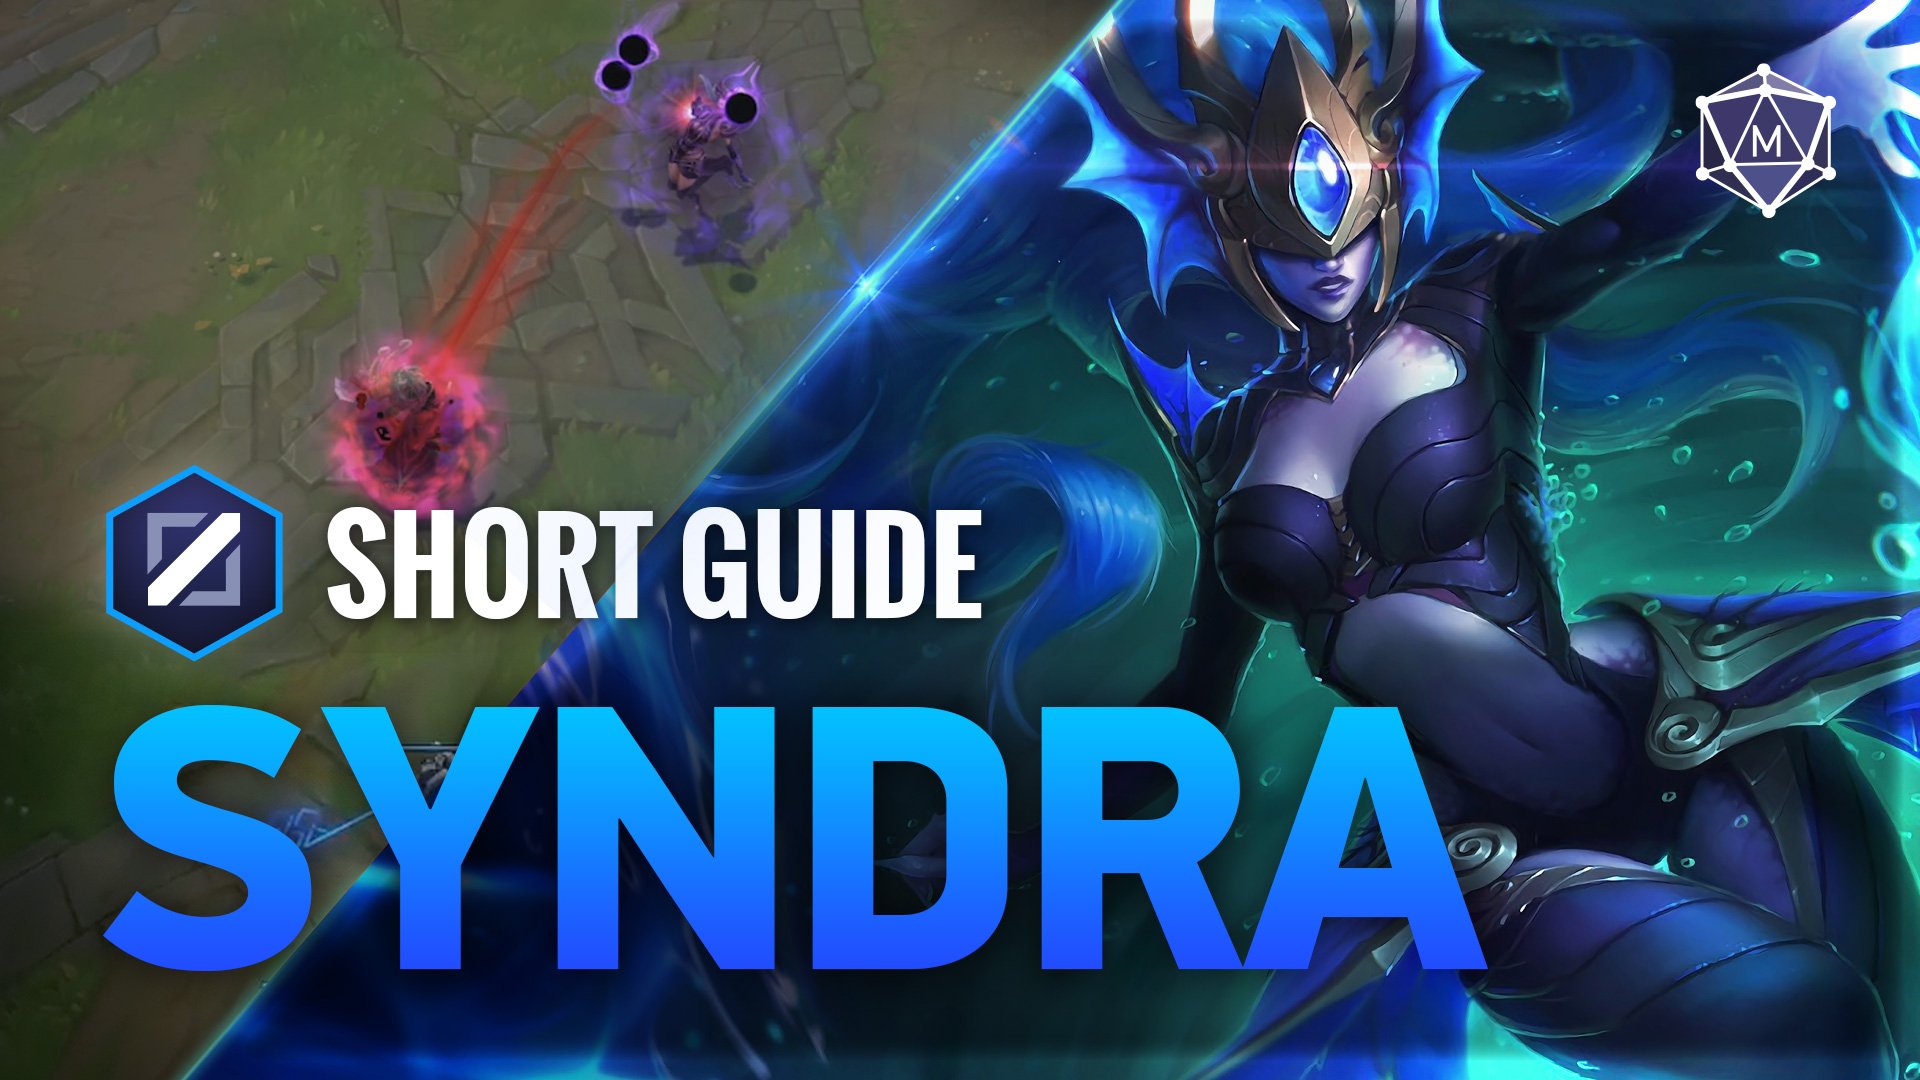 Syndra expert guide